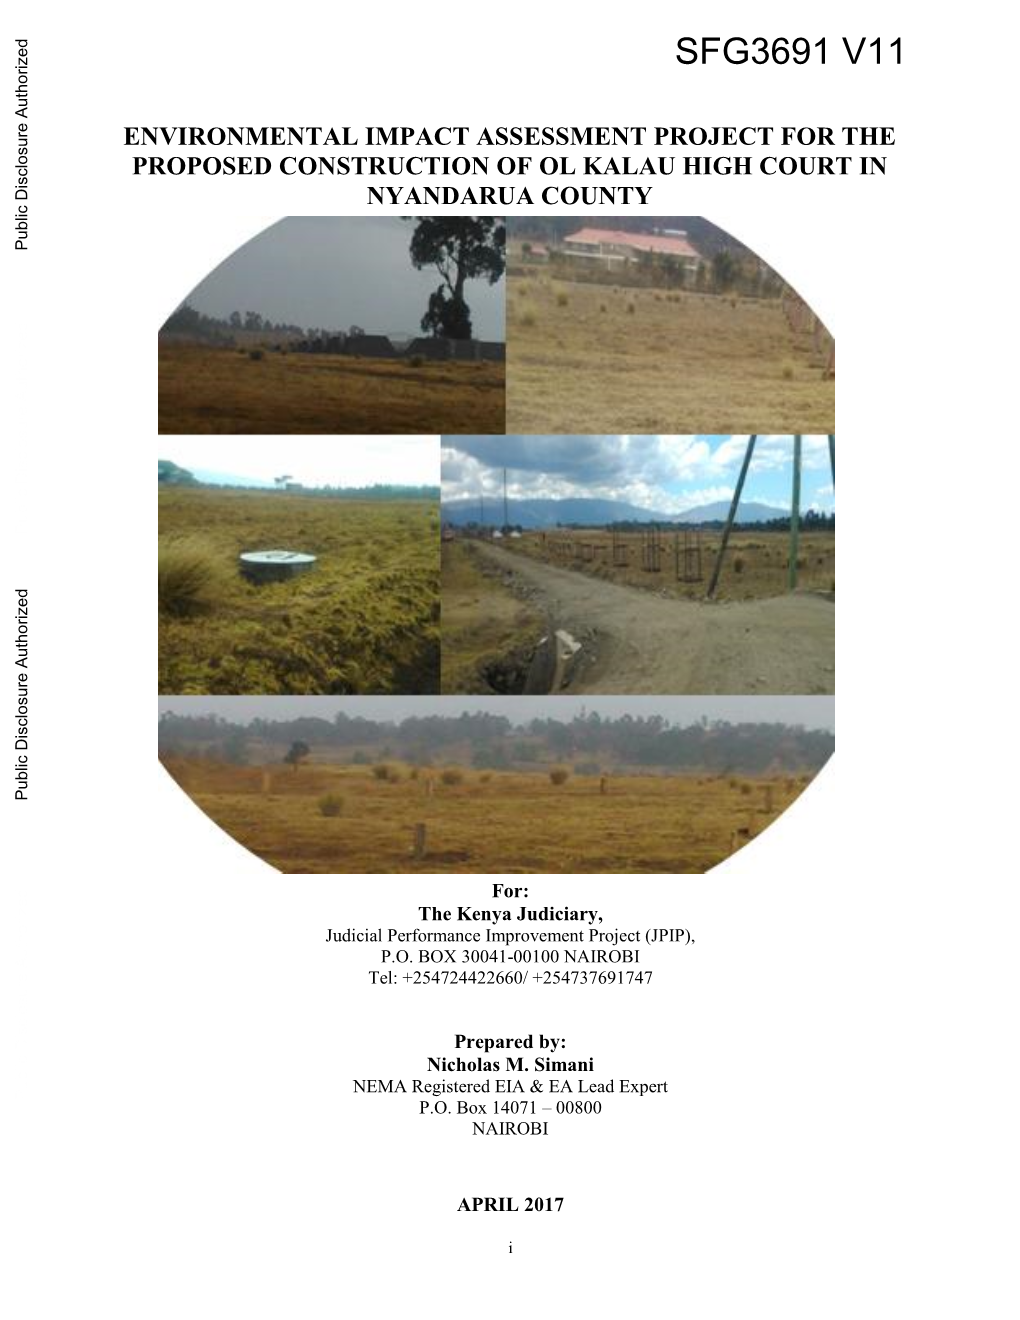 Environmental Impact Assessment Project for the Proposed Construction of Ol Kalau High Court in Nyandarua County